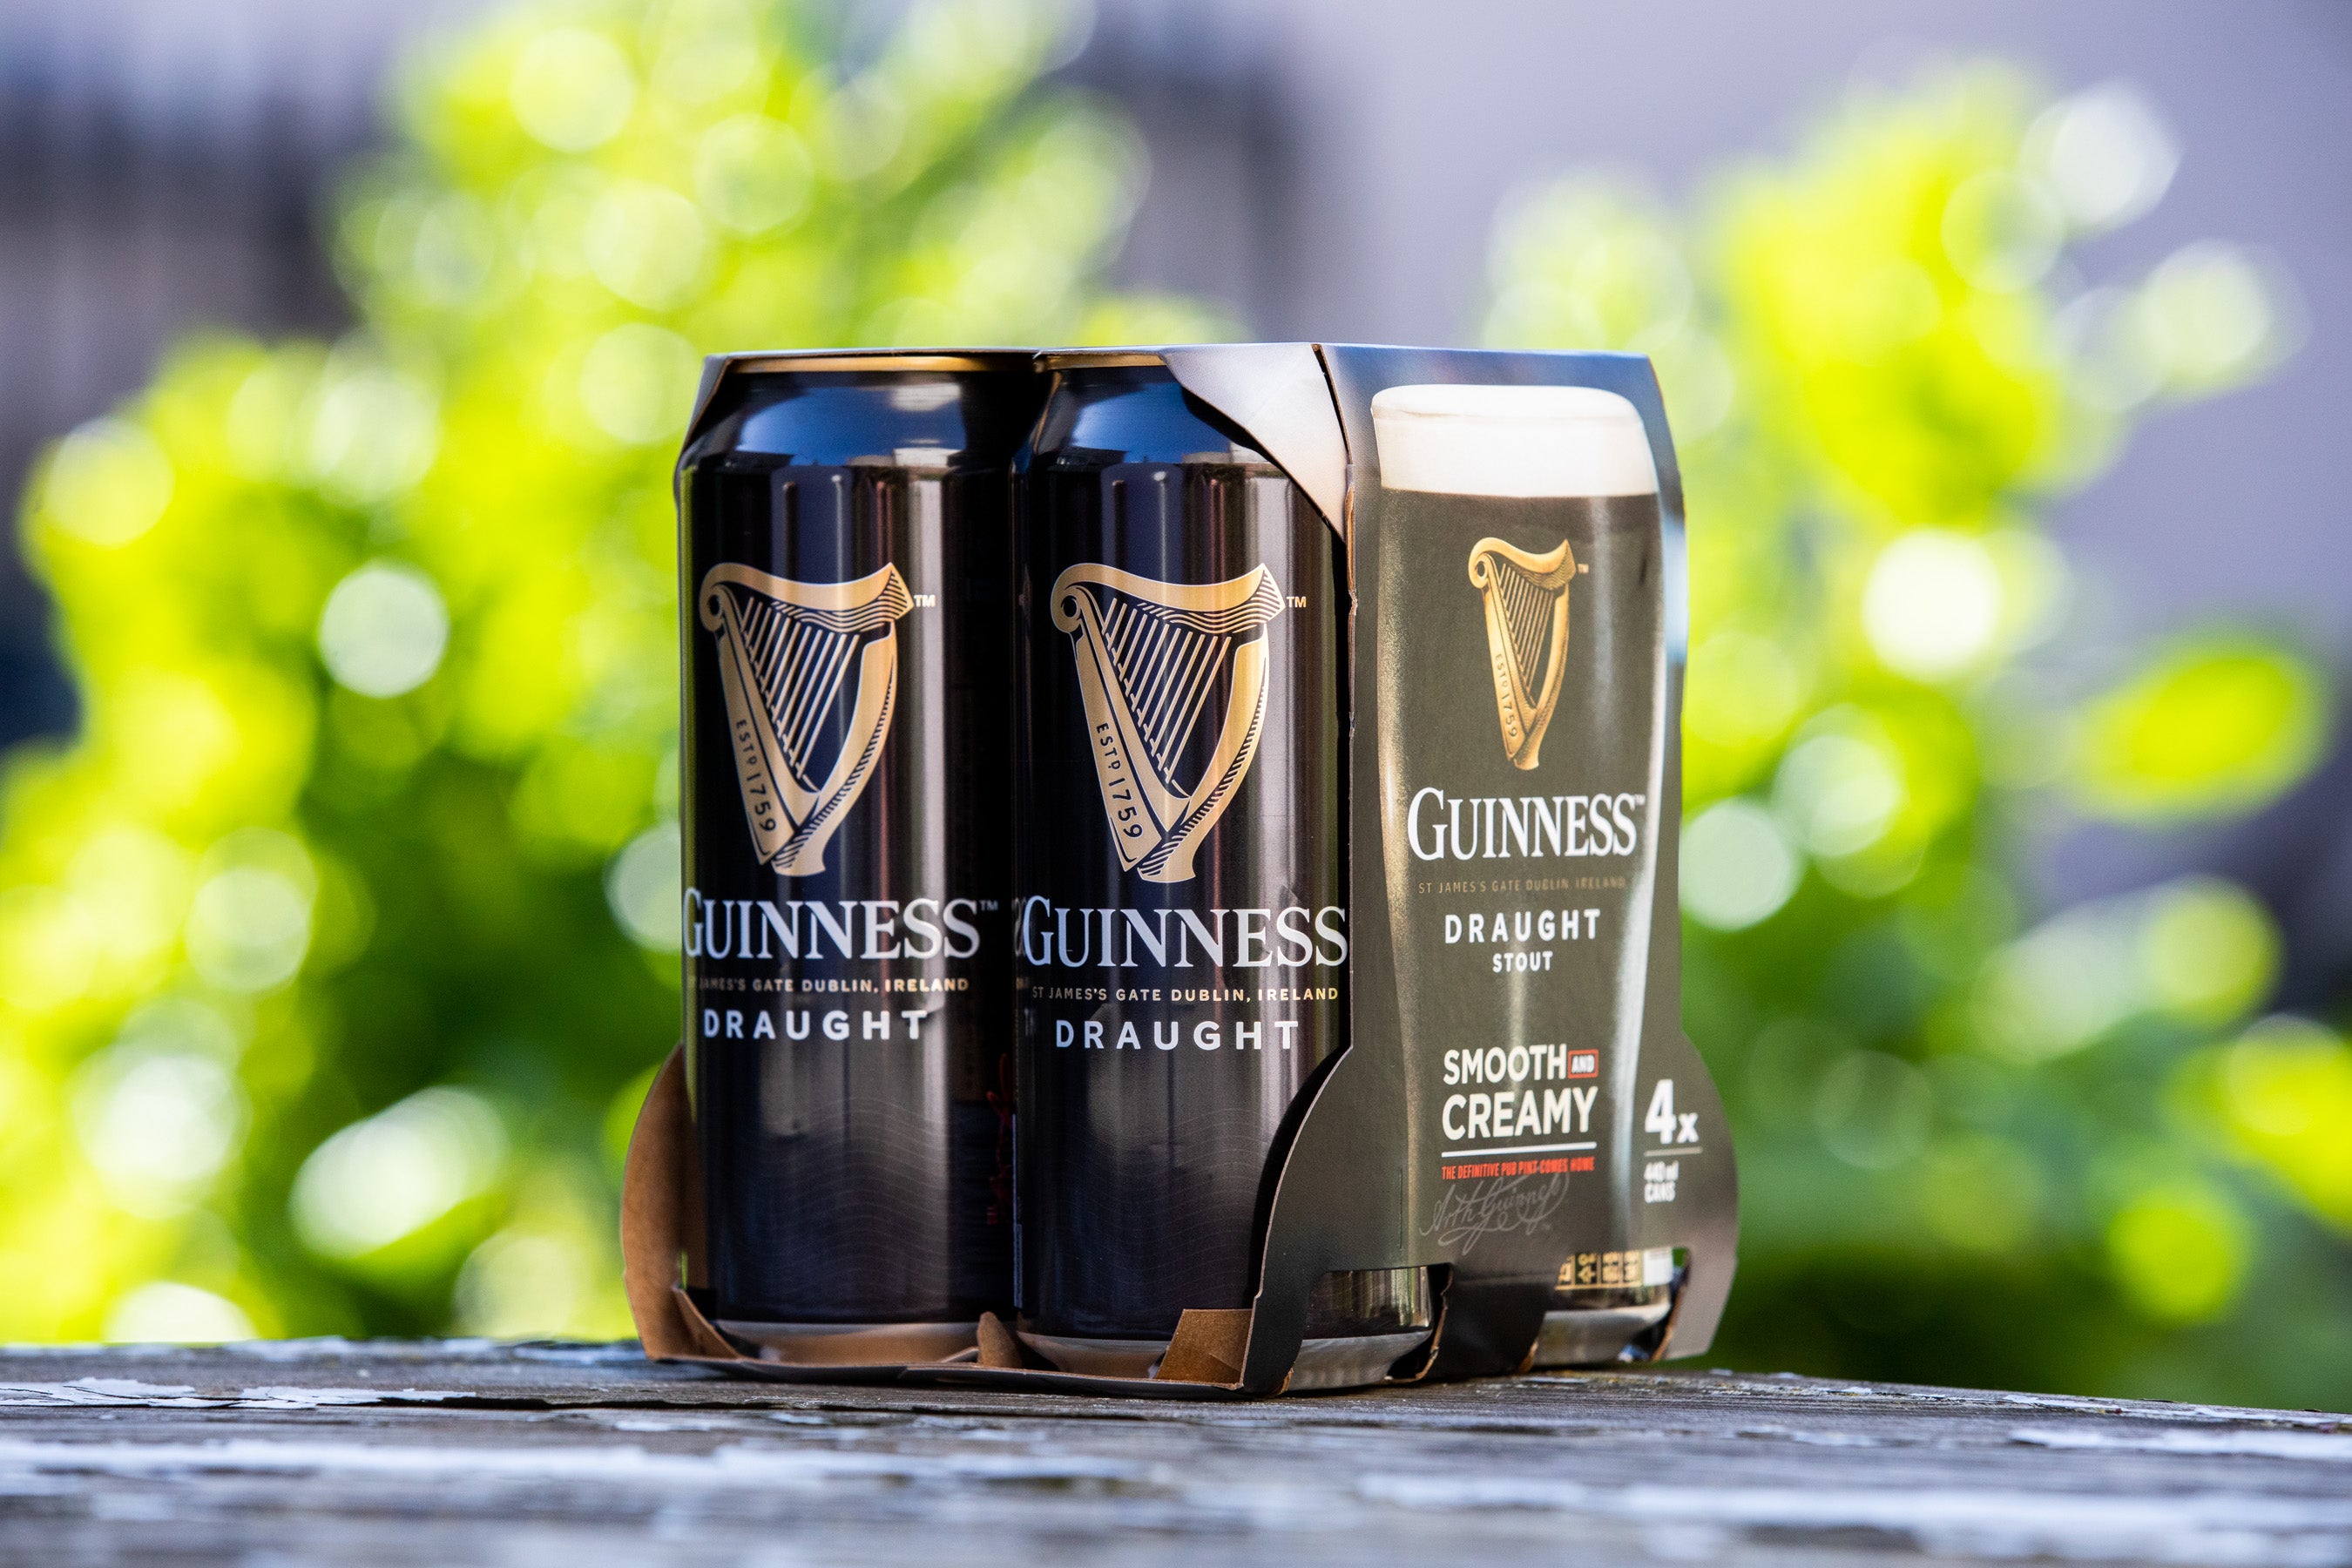 Guinness maker Diageo has cheered strong recent trading with a faster-than-expected recovery in Europe despite mounting supply chain woes.